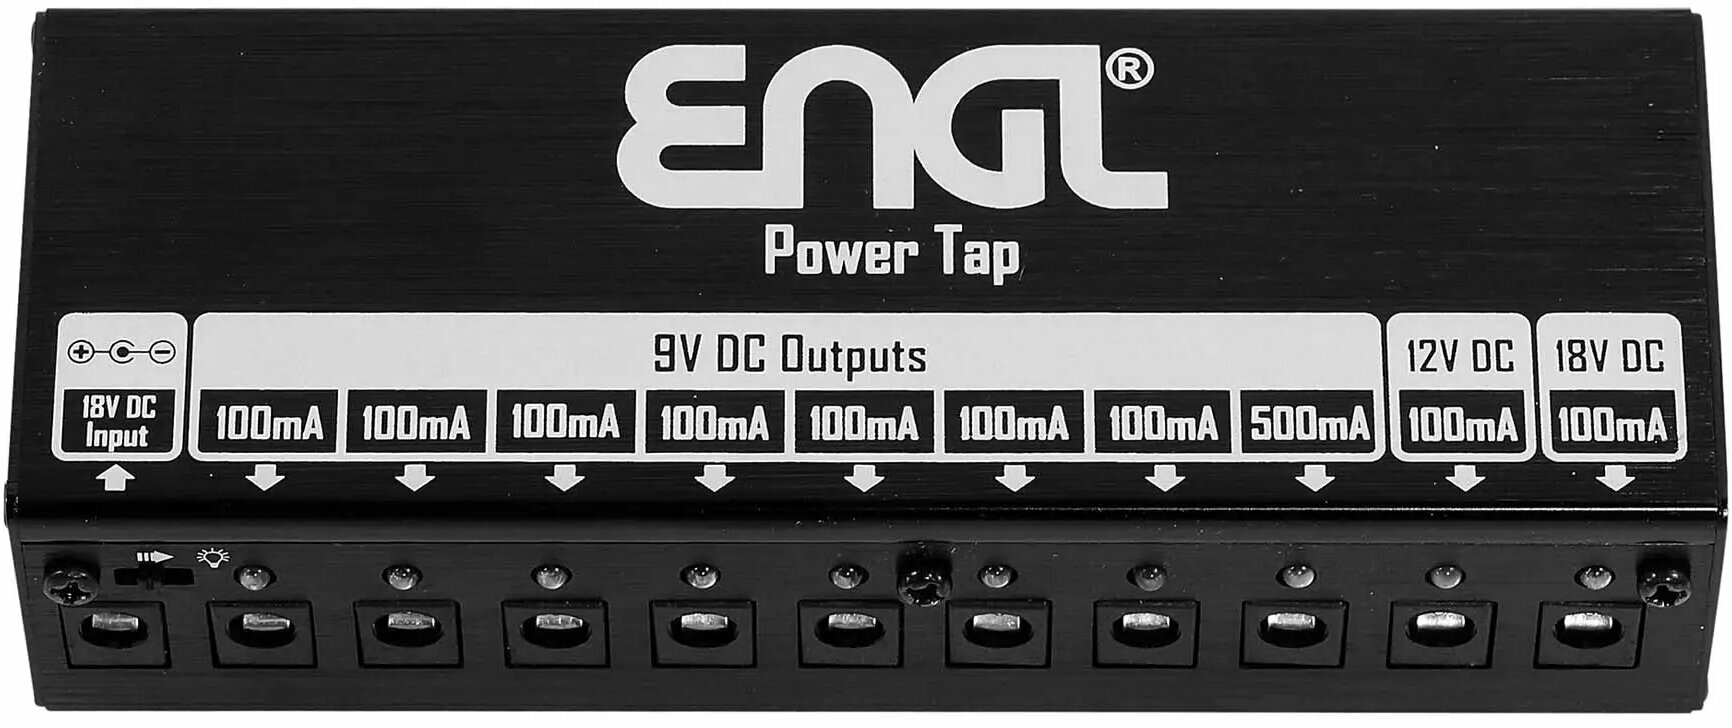 Power Supply Adapter Engl Engl Power Tap